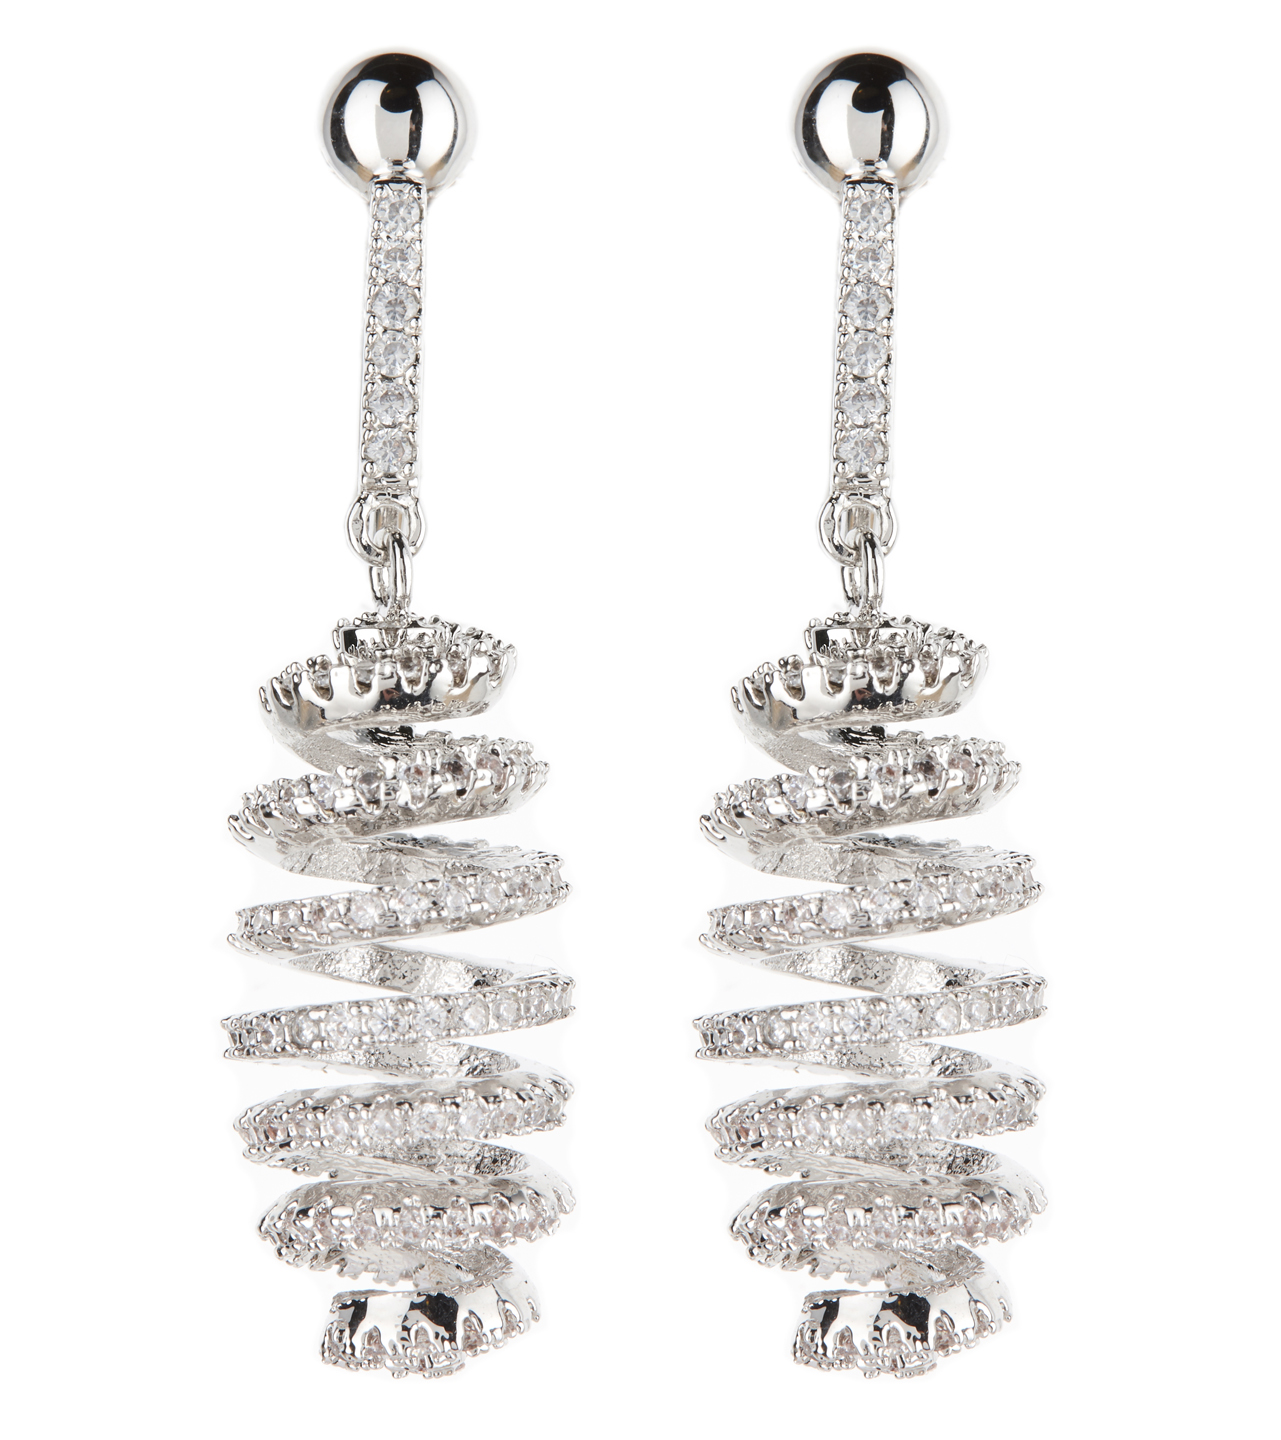 Clip On Earrings - Cindy - silver spiral luxury earring with clear crystals